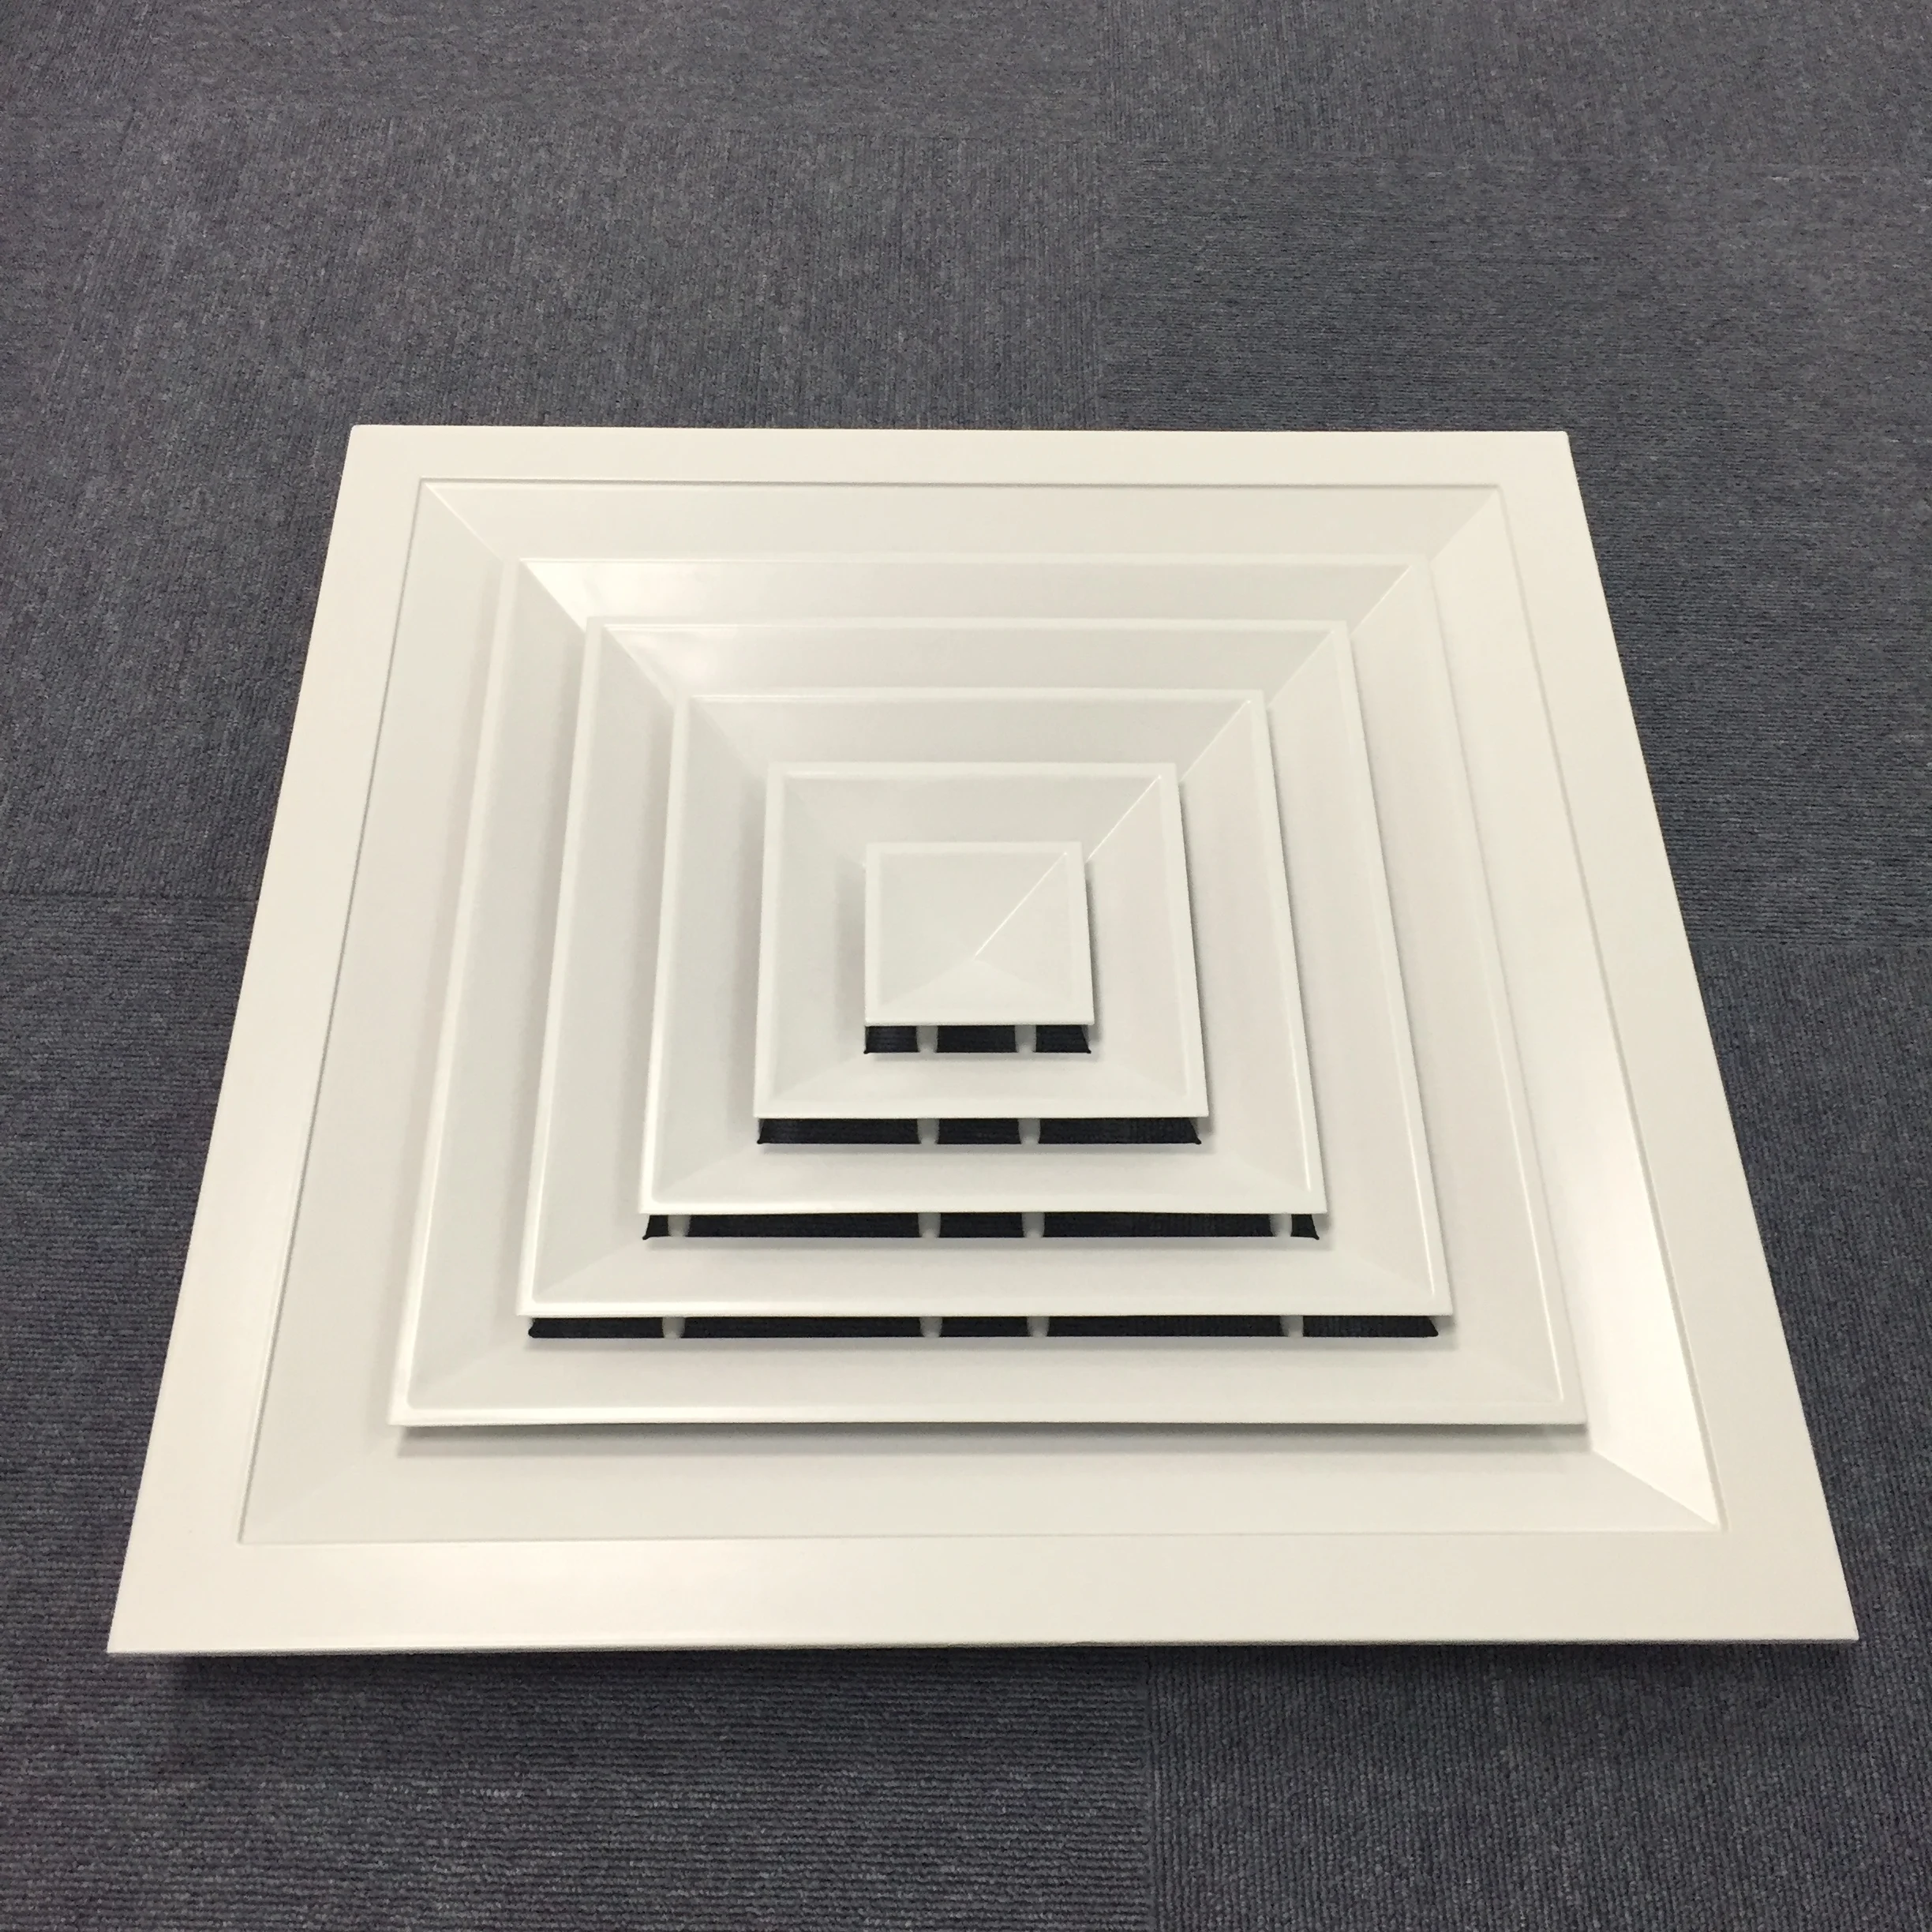 Supply air intake wall vent square diffuser with damper